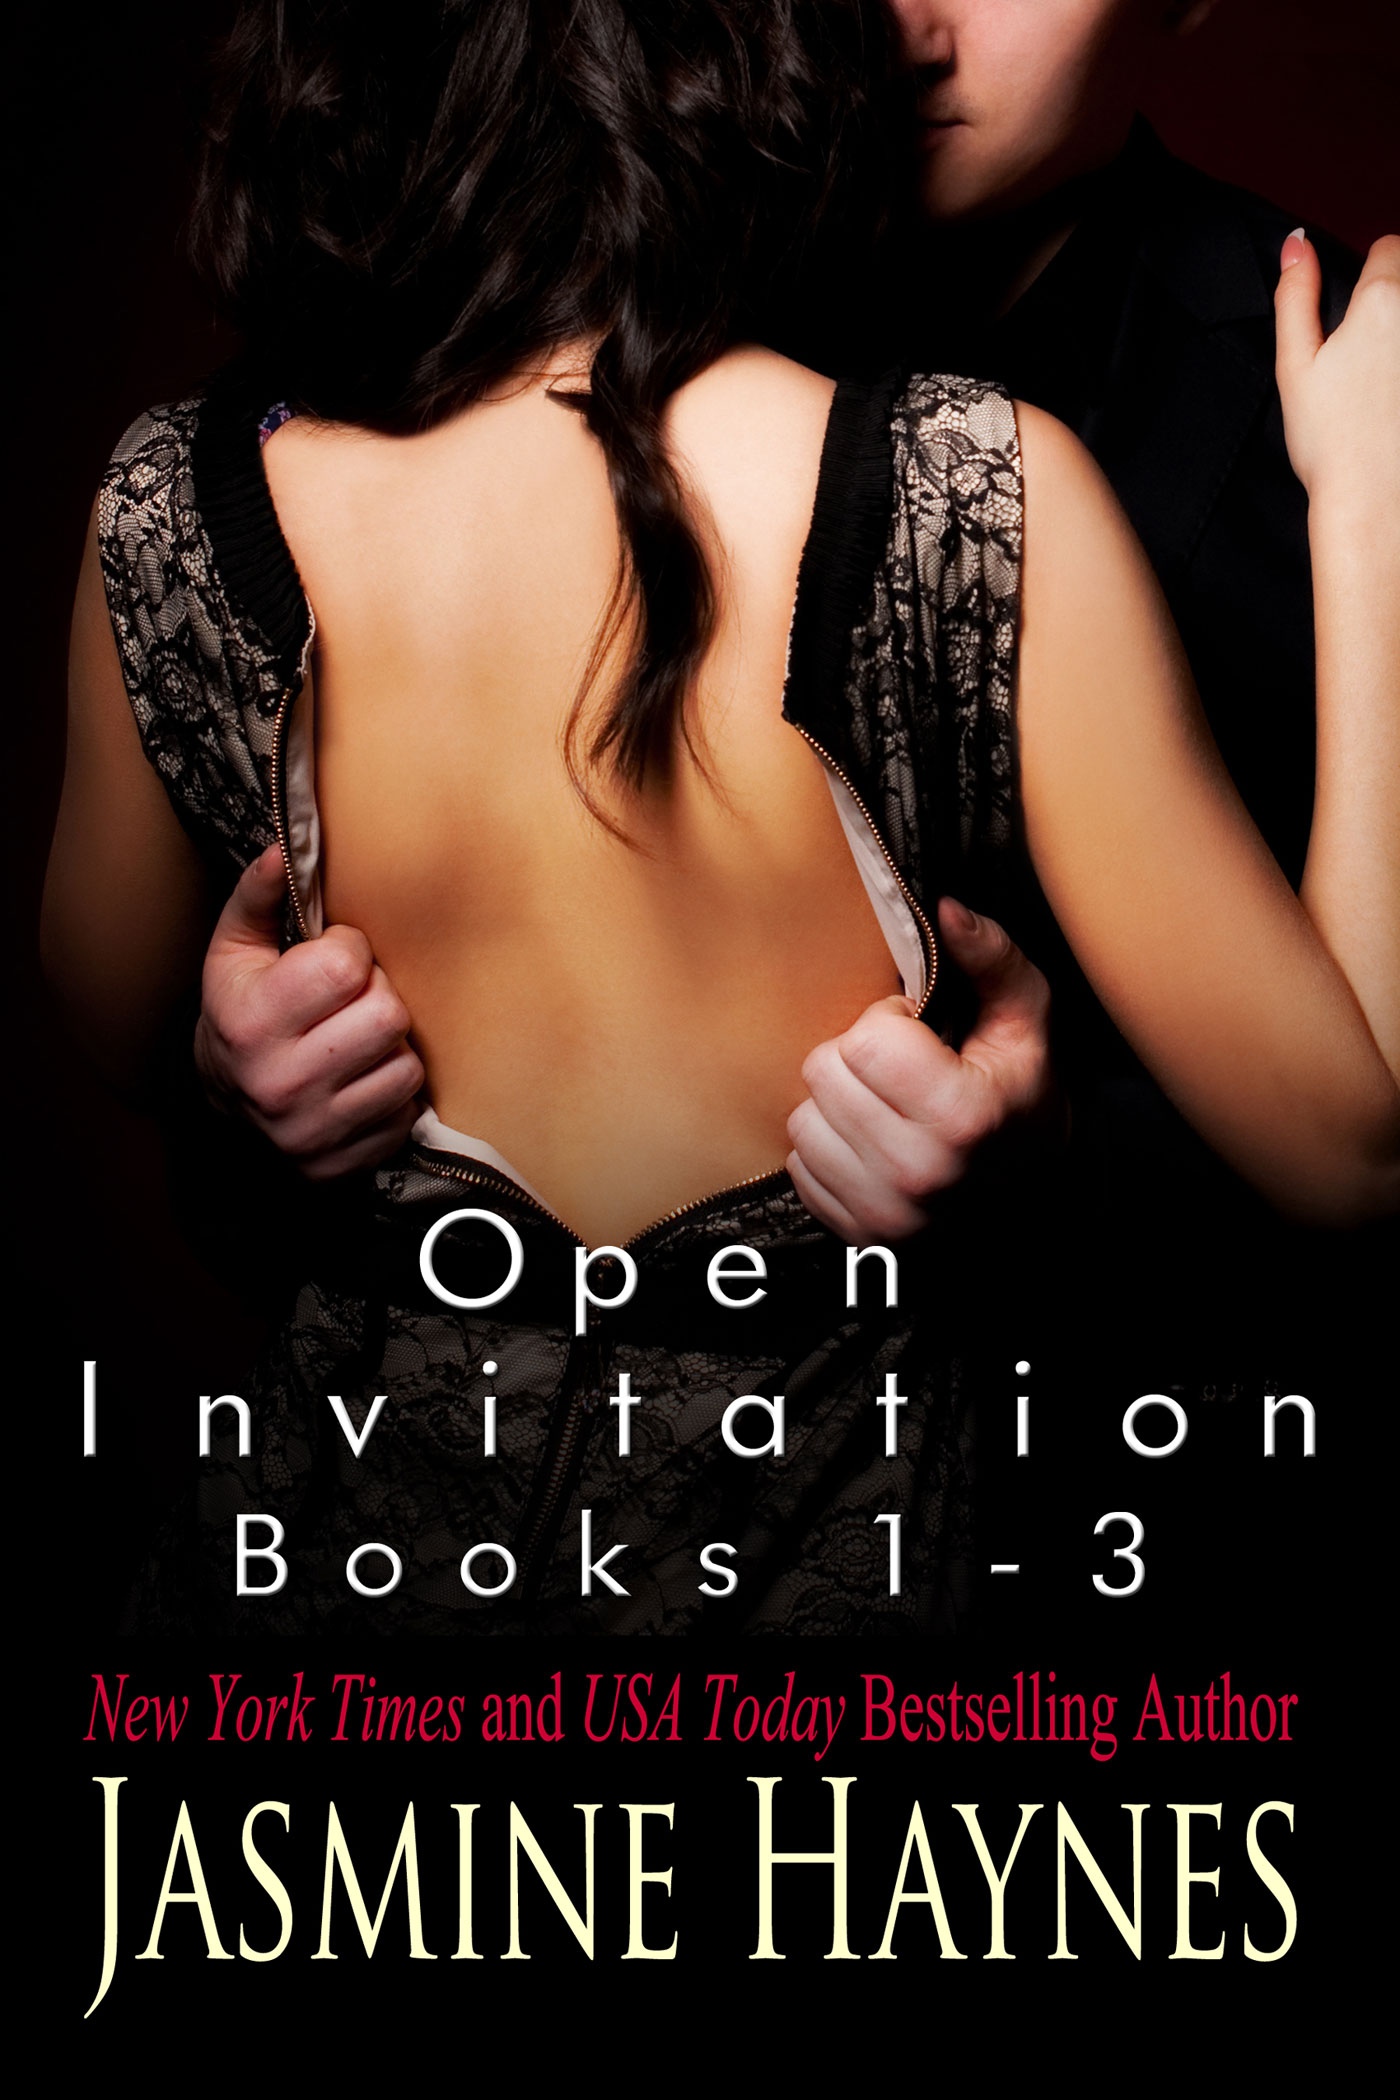 Cover of Open Invitation Books 1-3 by New York Times and USA Today Bestselling Author Jasmine Haynes